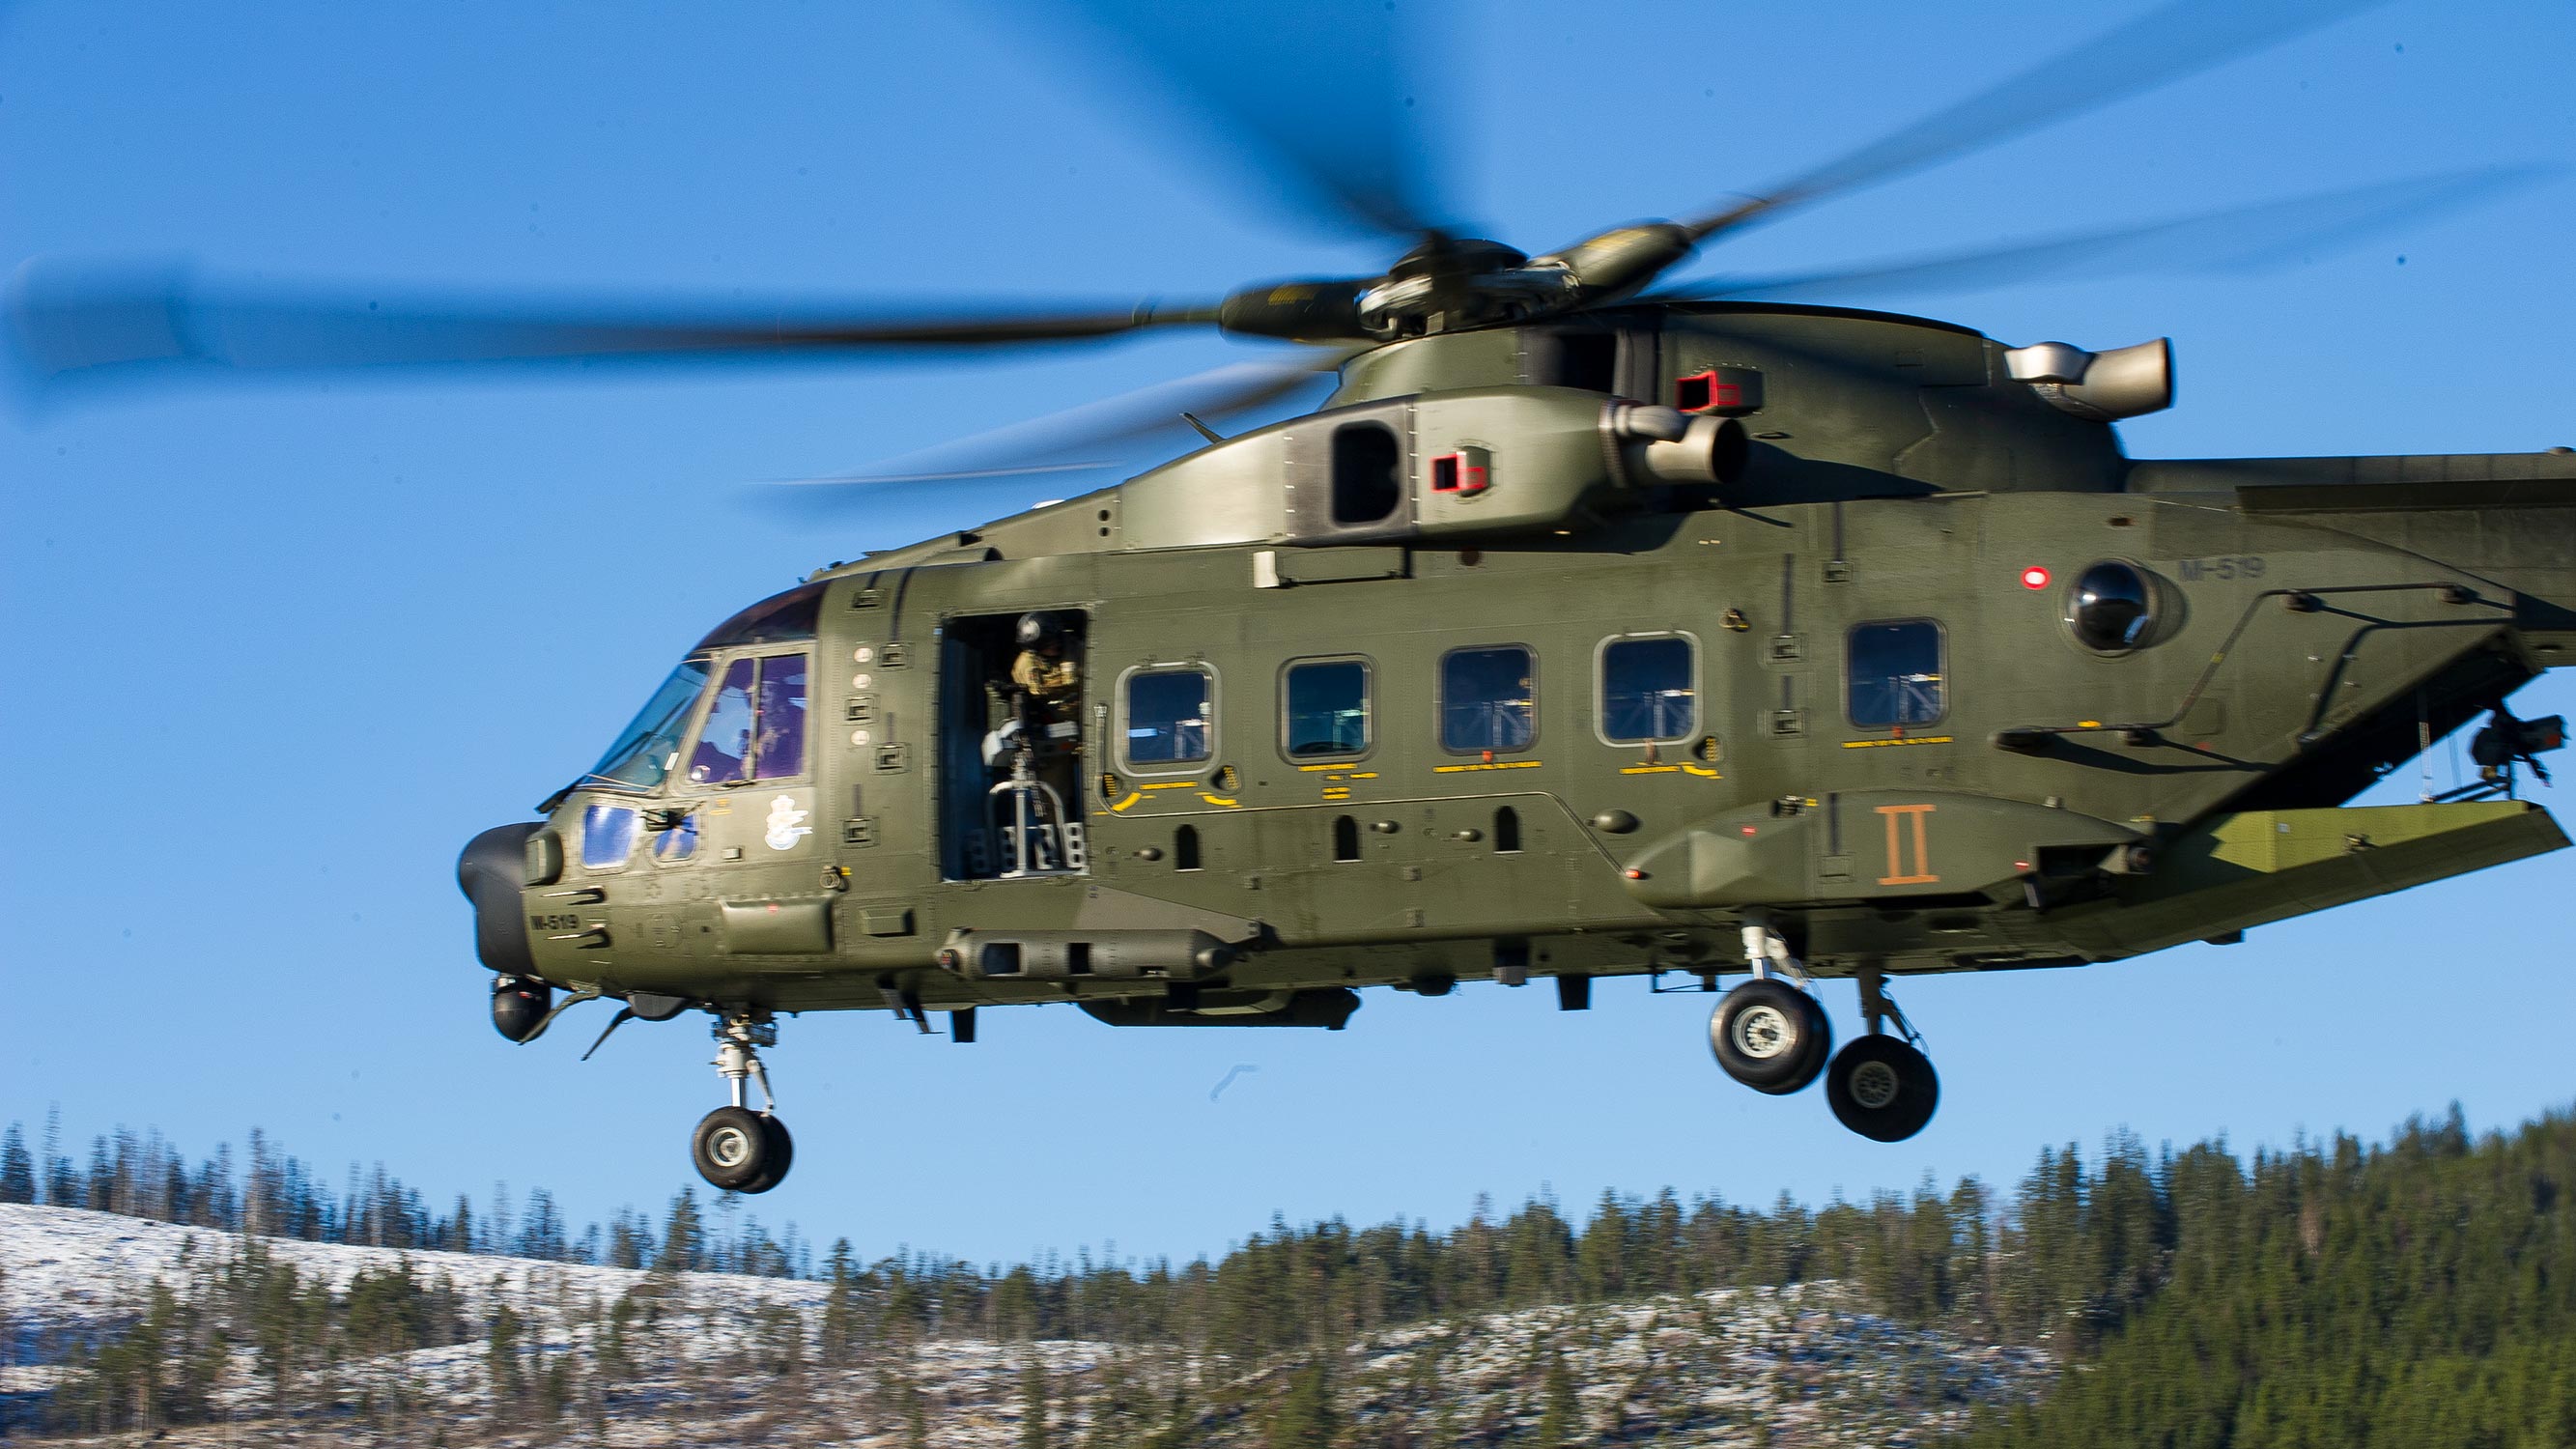 Danish EH-101 helicopter